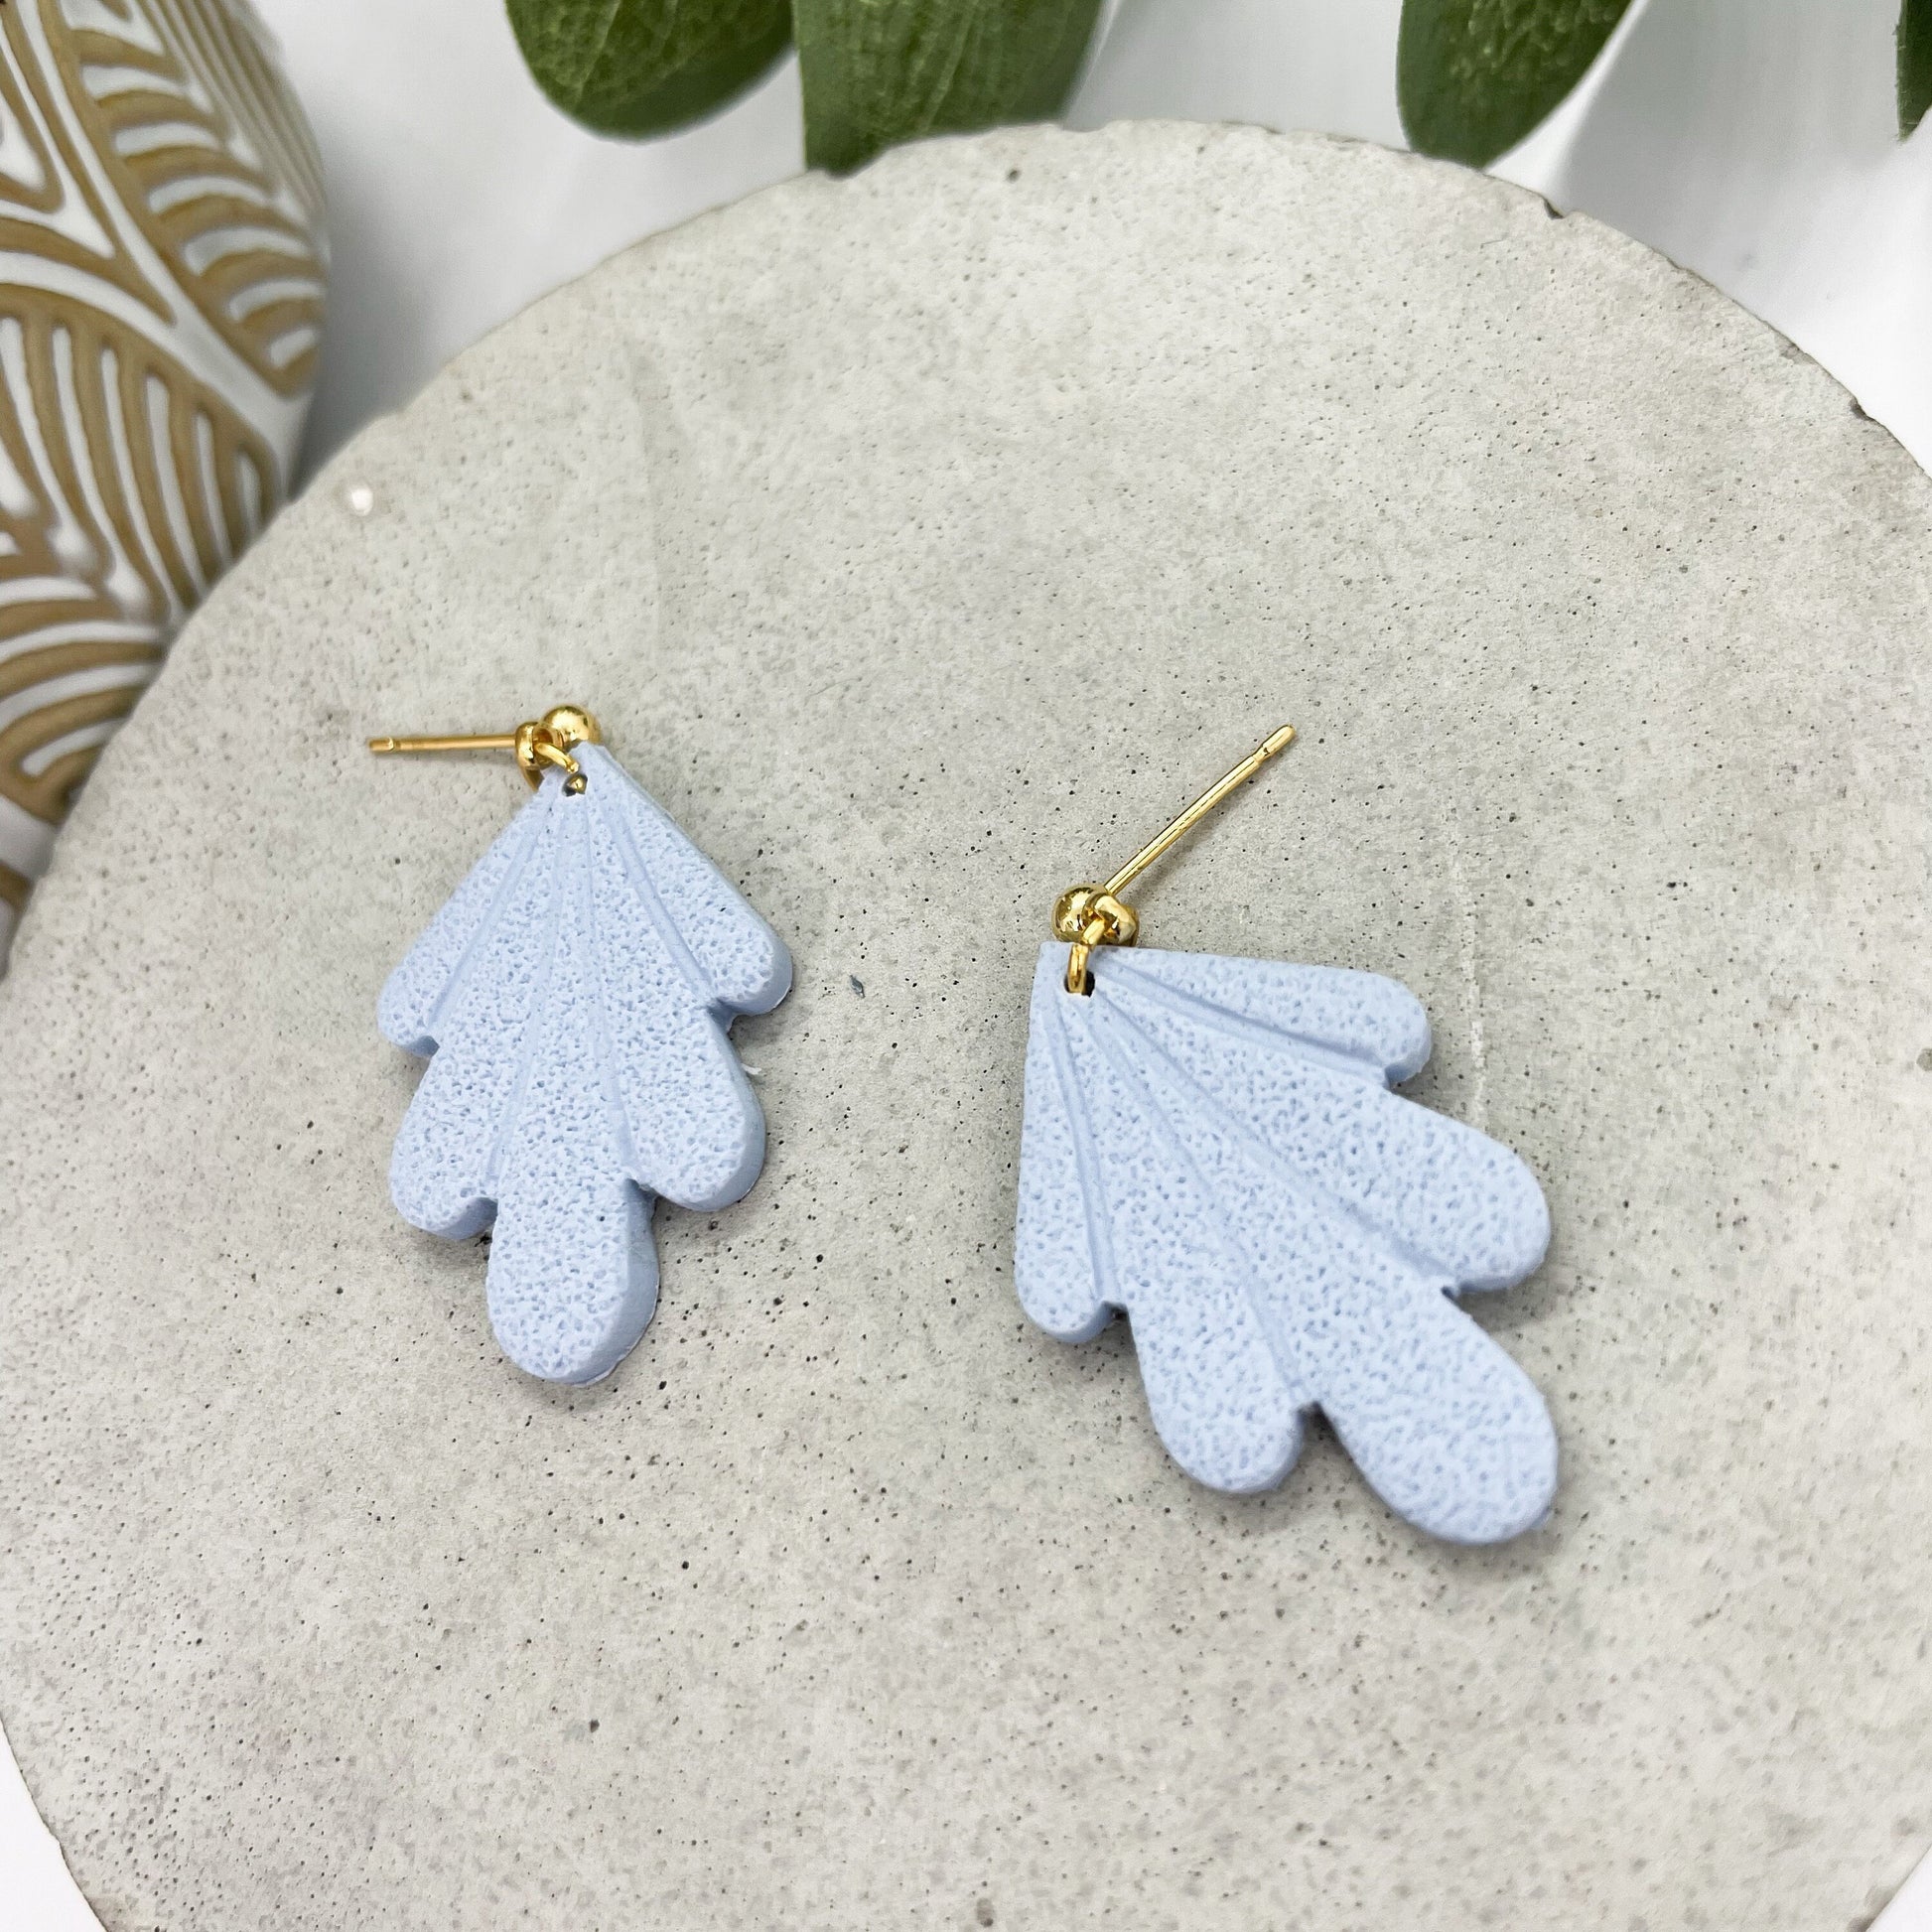 Textured blue Polymer clay earrings, post box gift, best friend gift, girlfriend gift, sister gift